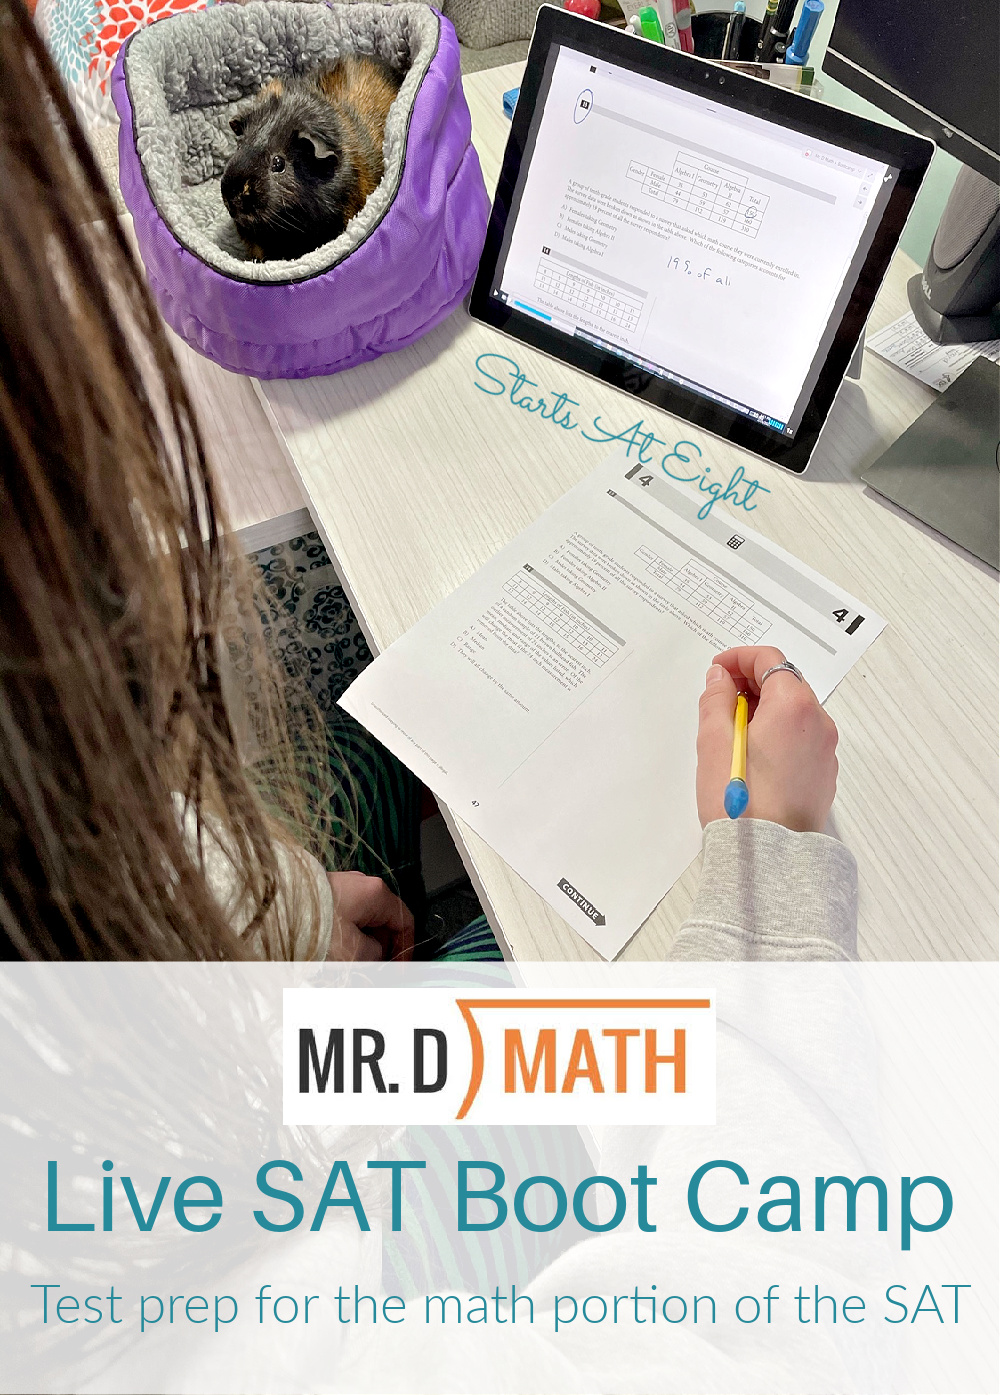 Mr.D Math Live SAT Boot Camp is a 6 week course that prepares high school students for the math portion of the SAT. They will learn test taking strategies, review formulas they'll need to memorize, take practice tests and more! A Review from Starts At Eight